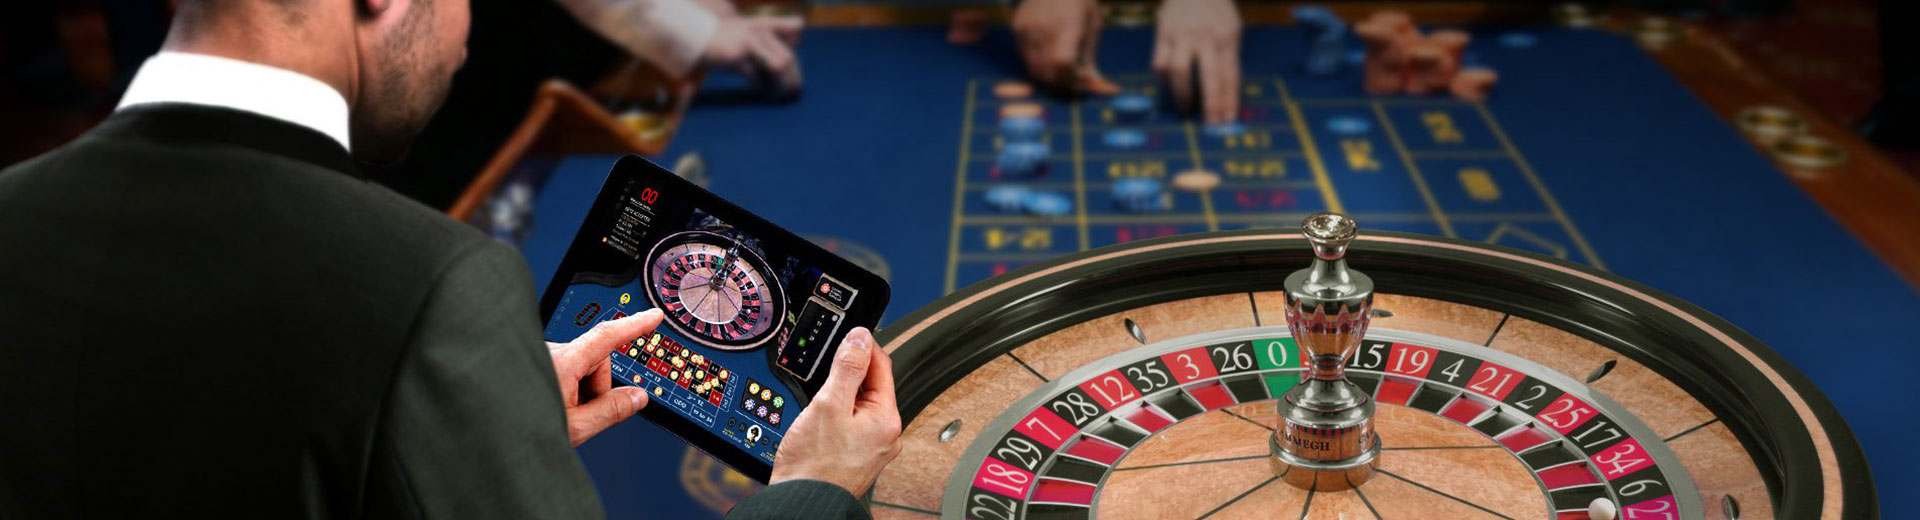 Gaming Equipment, Betting Layout and Stakes for Roulette Games